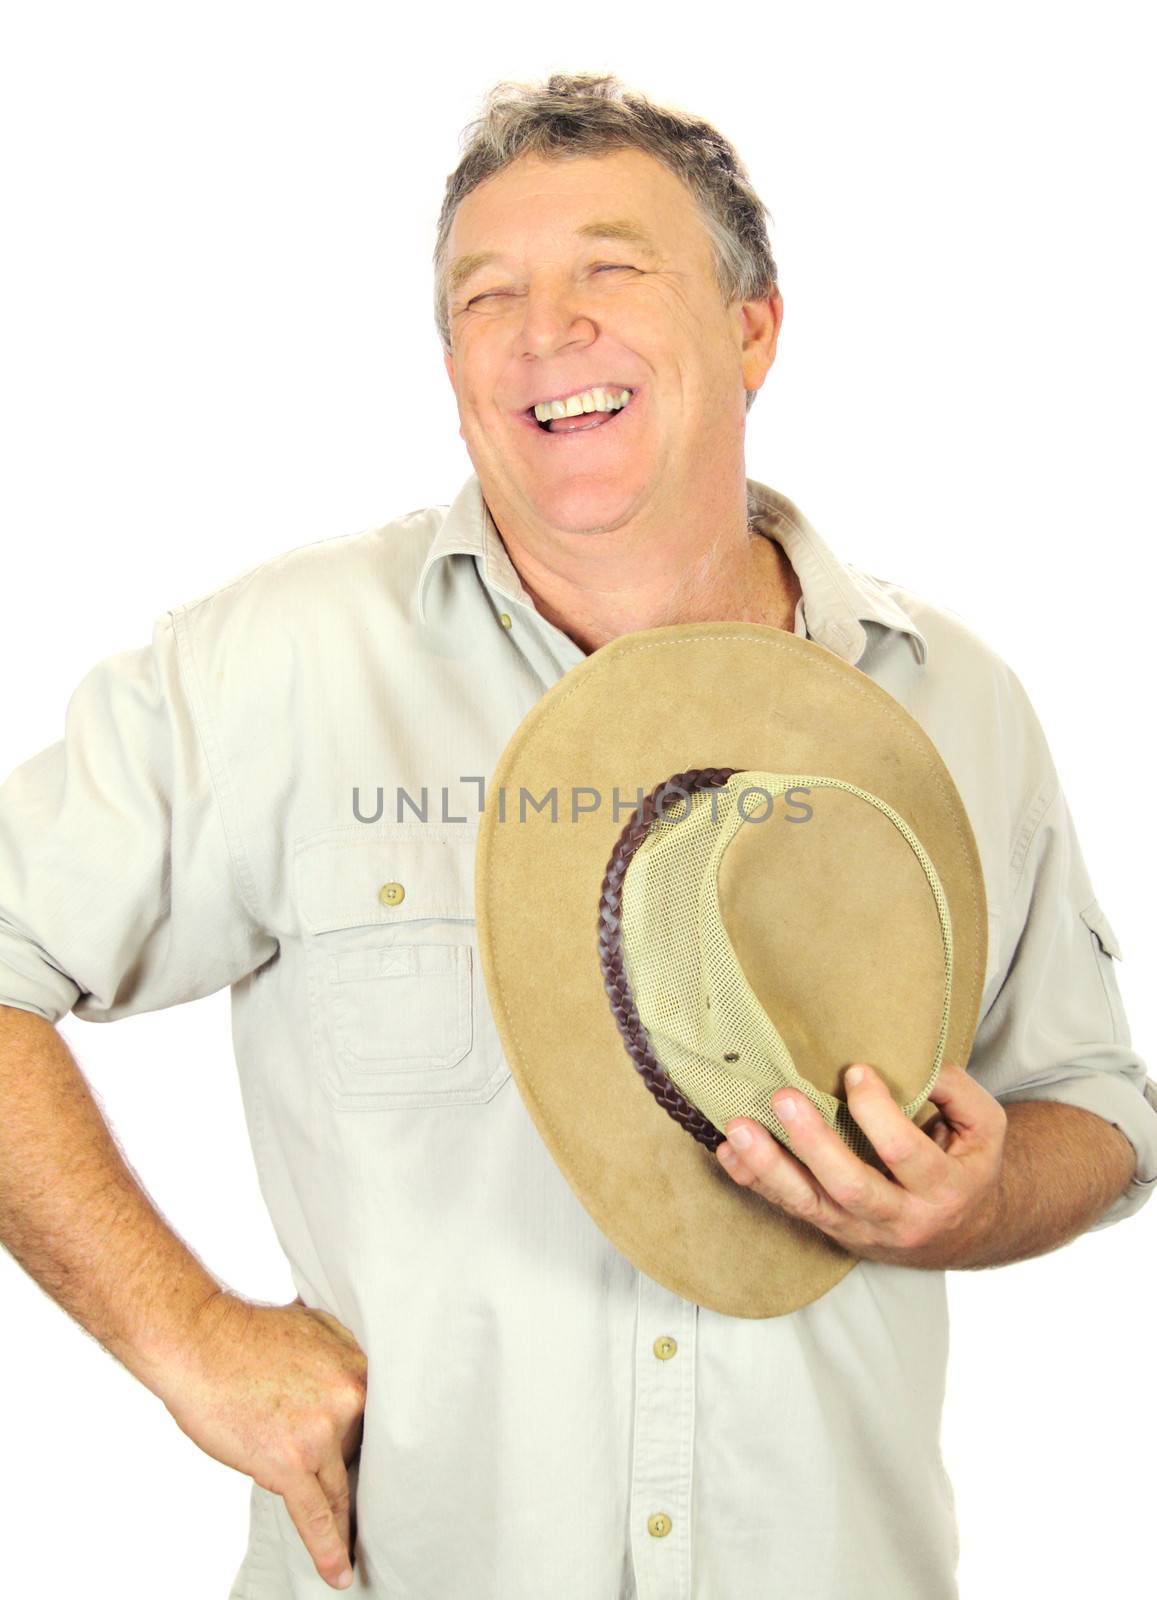 Middle aged laughing man standing and holding hat.